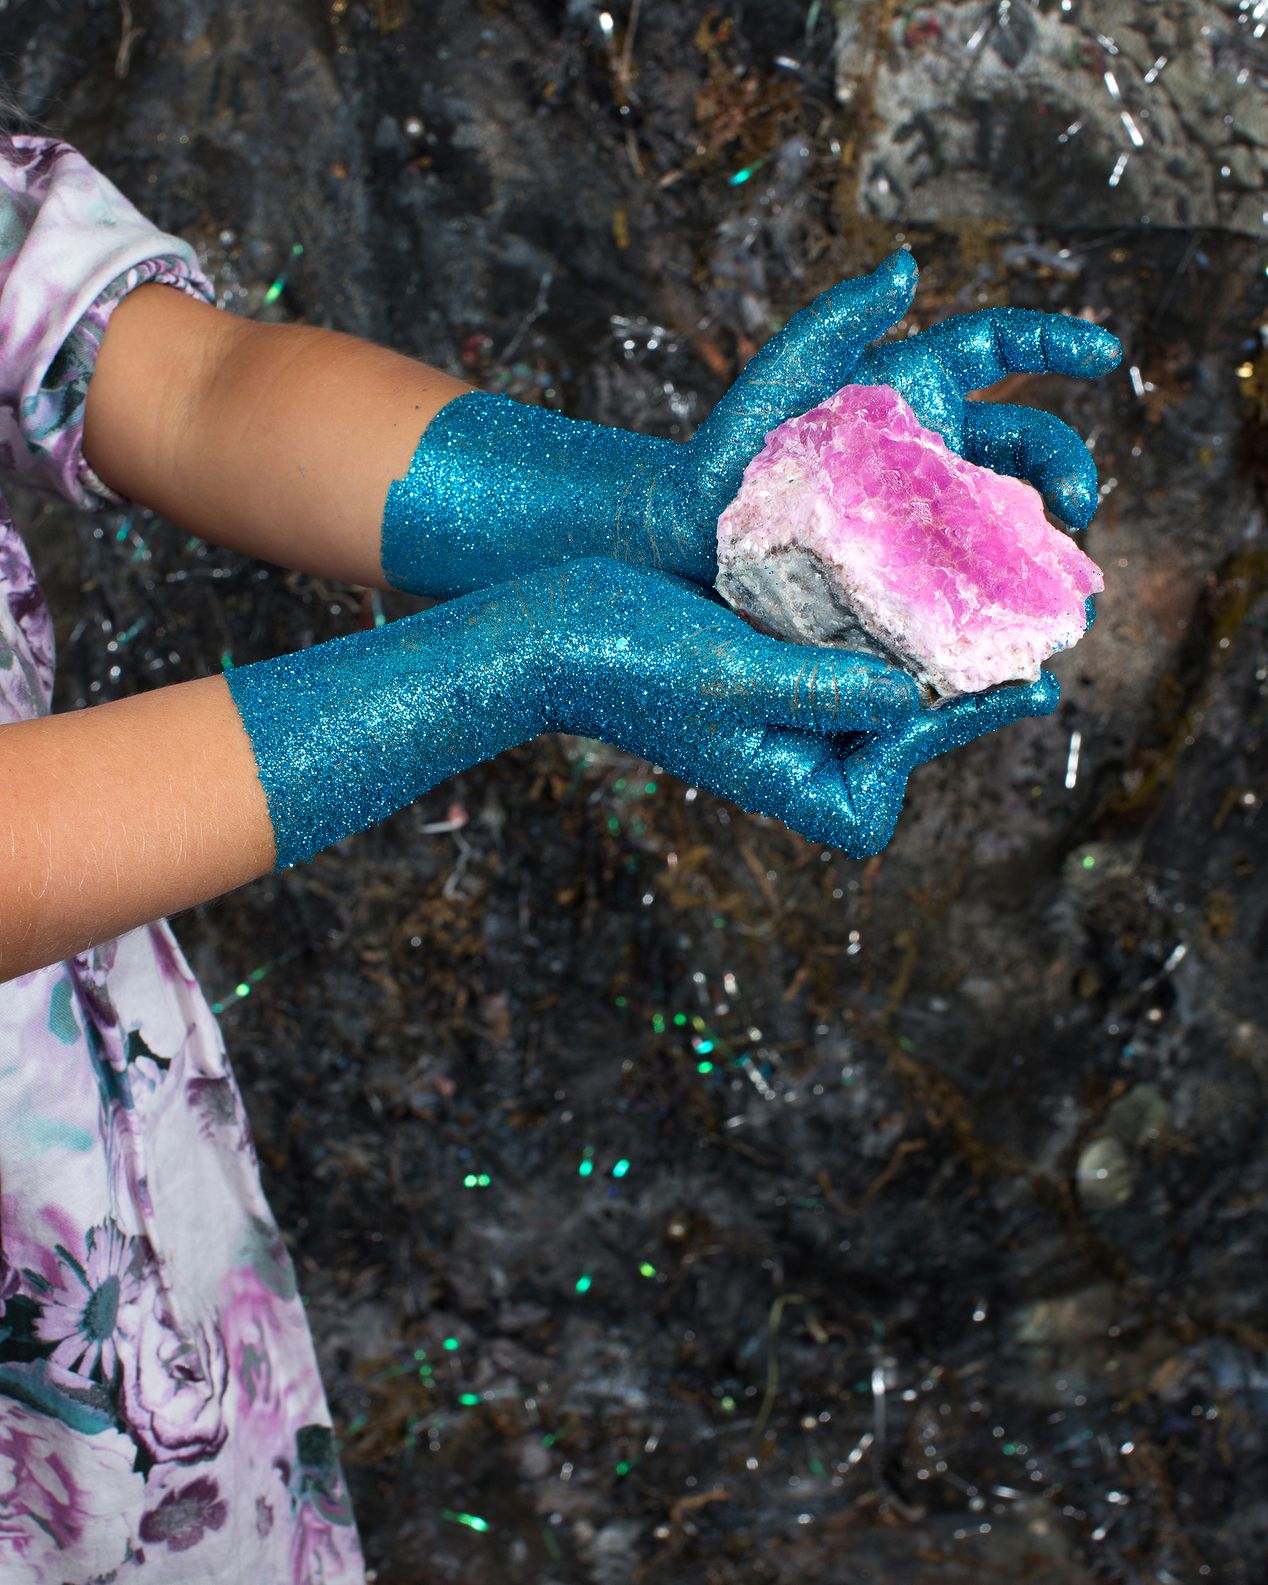 Detail photo of a girls hands covered in glitter, holding a large crystal, Ilona Szwarc, LA photo studio. 